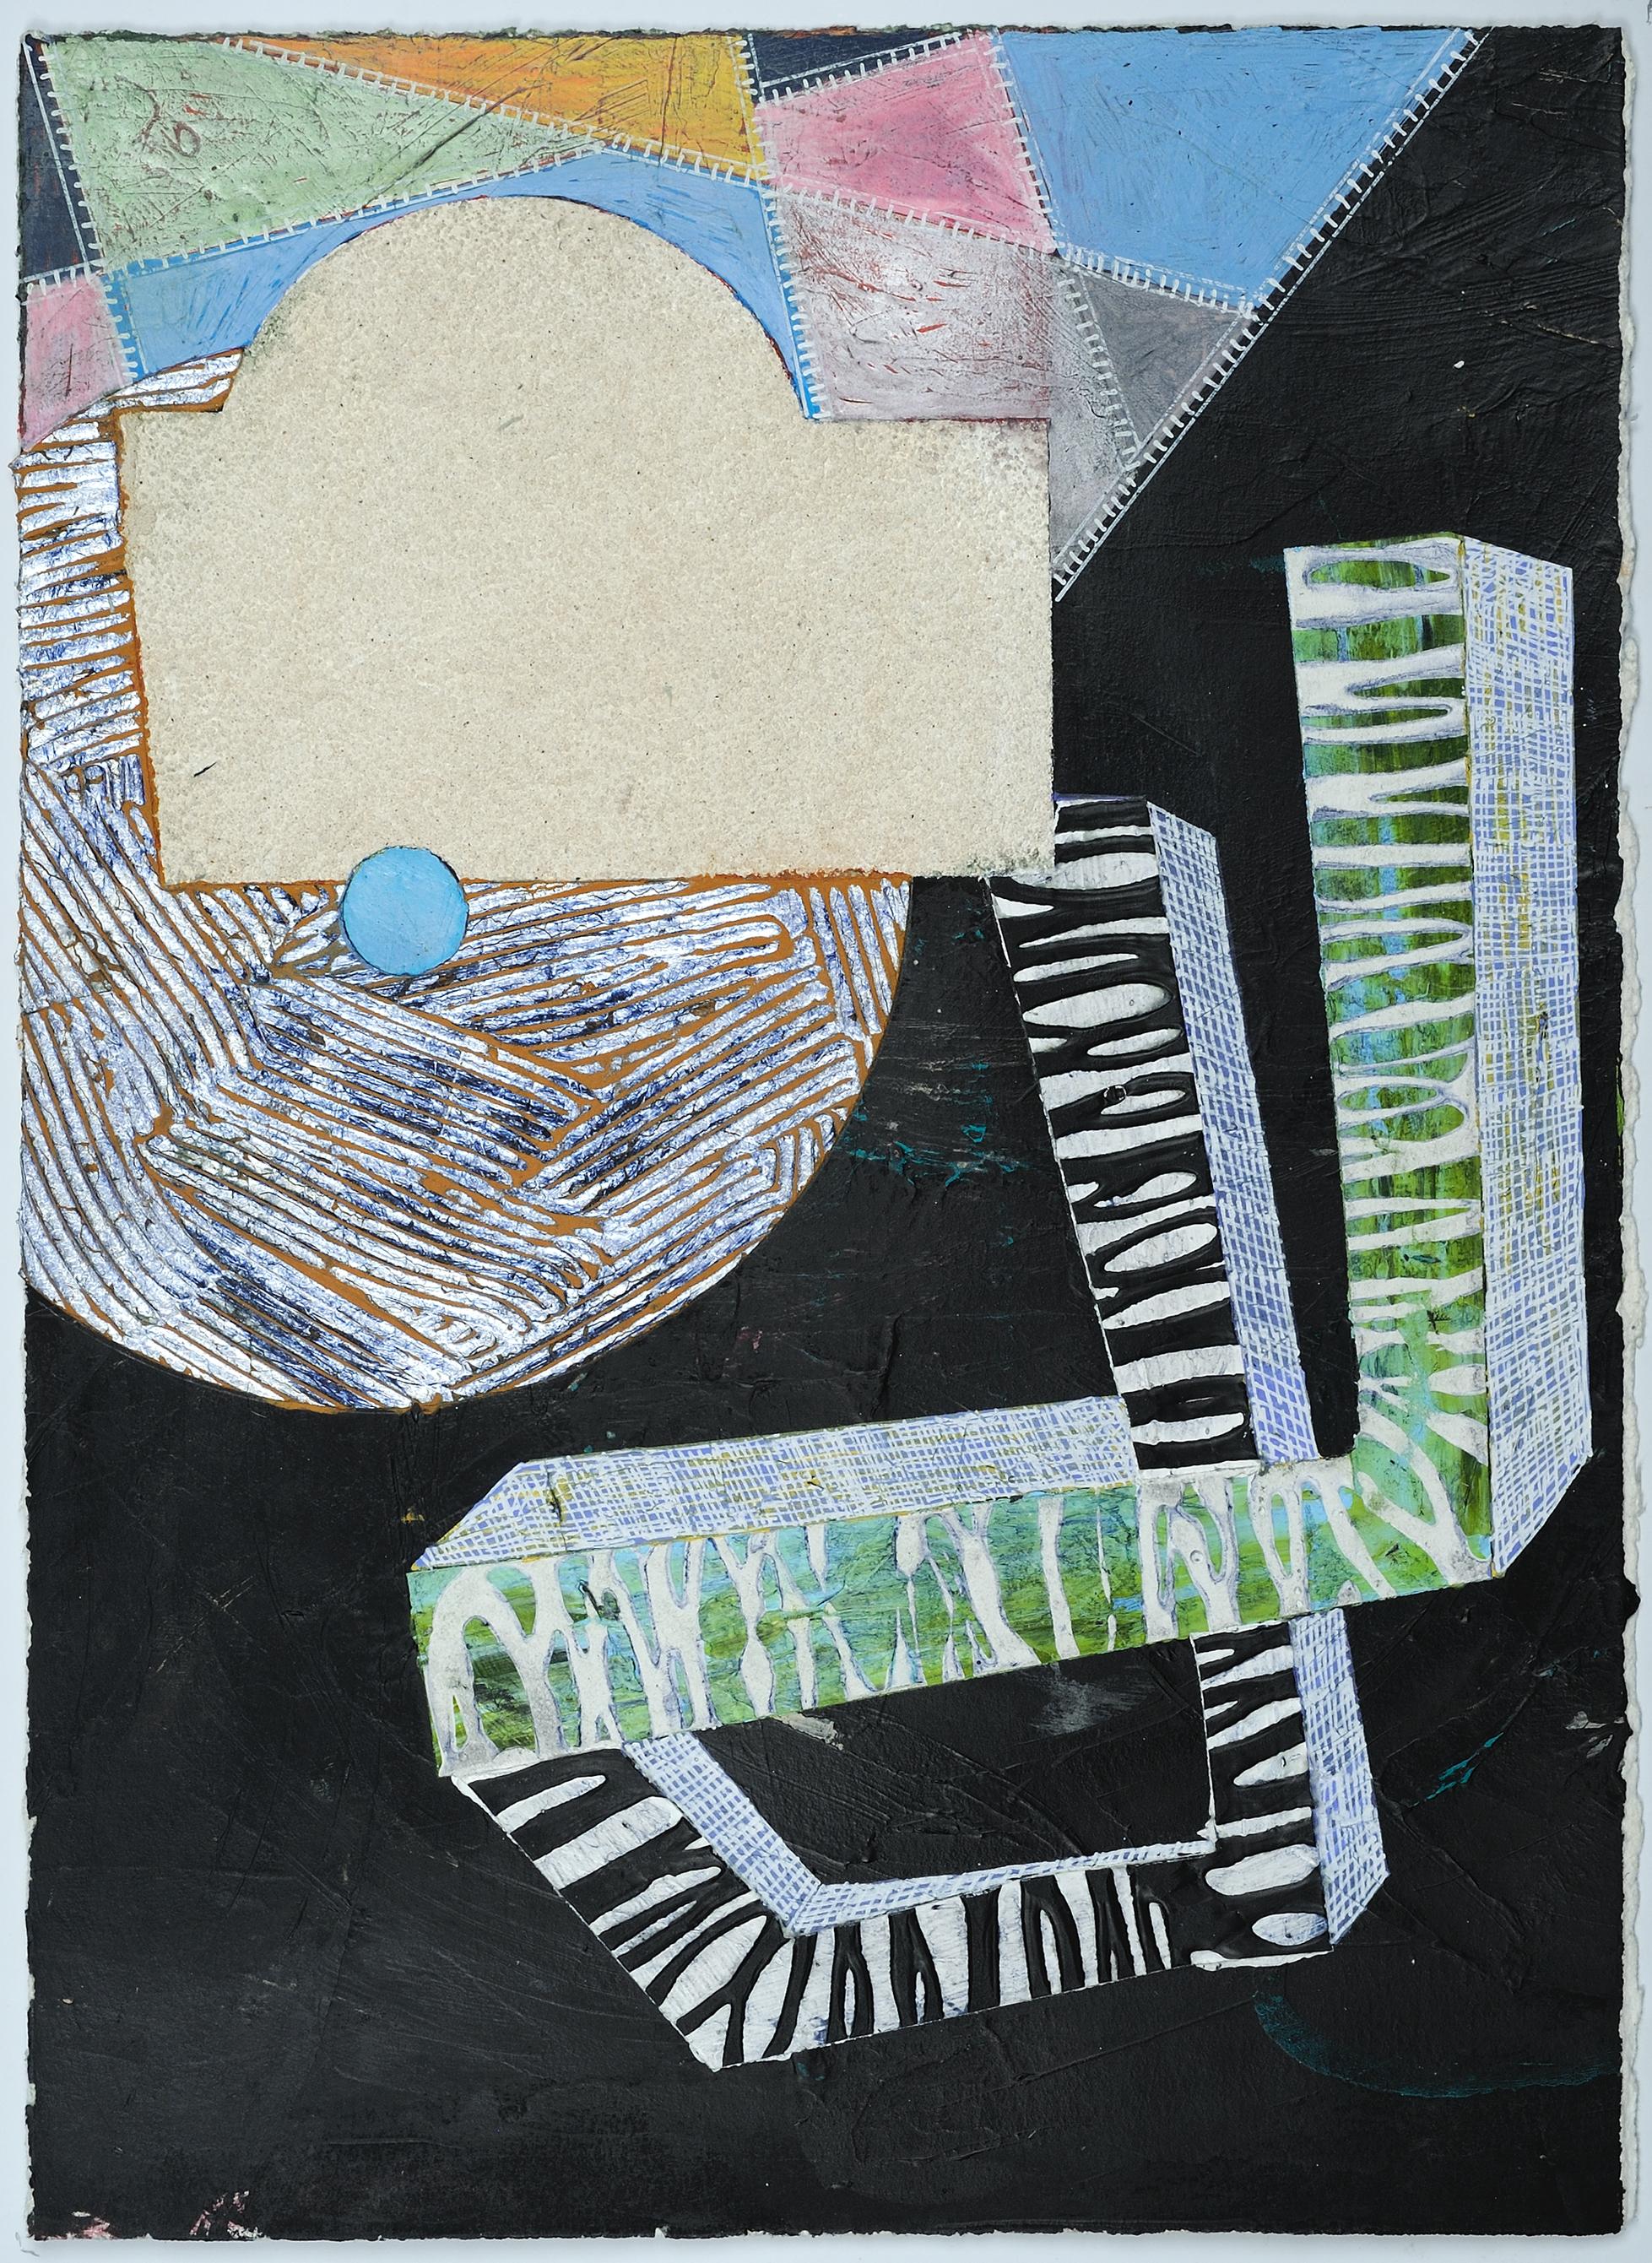 Francie Hester Abstract Painting - Daily Drawing 2020 #20, geometric abstract work on paper, black, blue, green